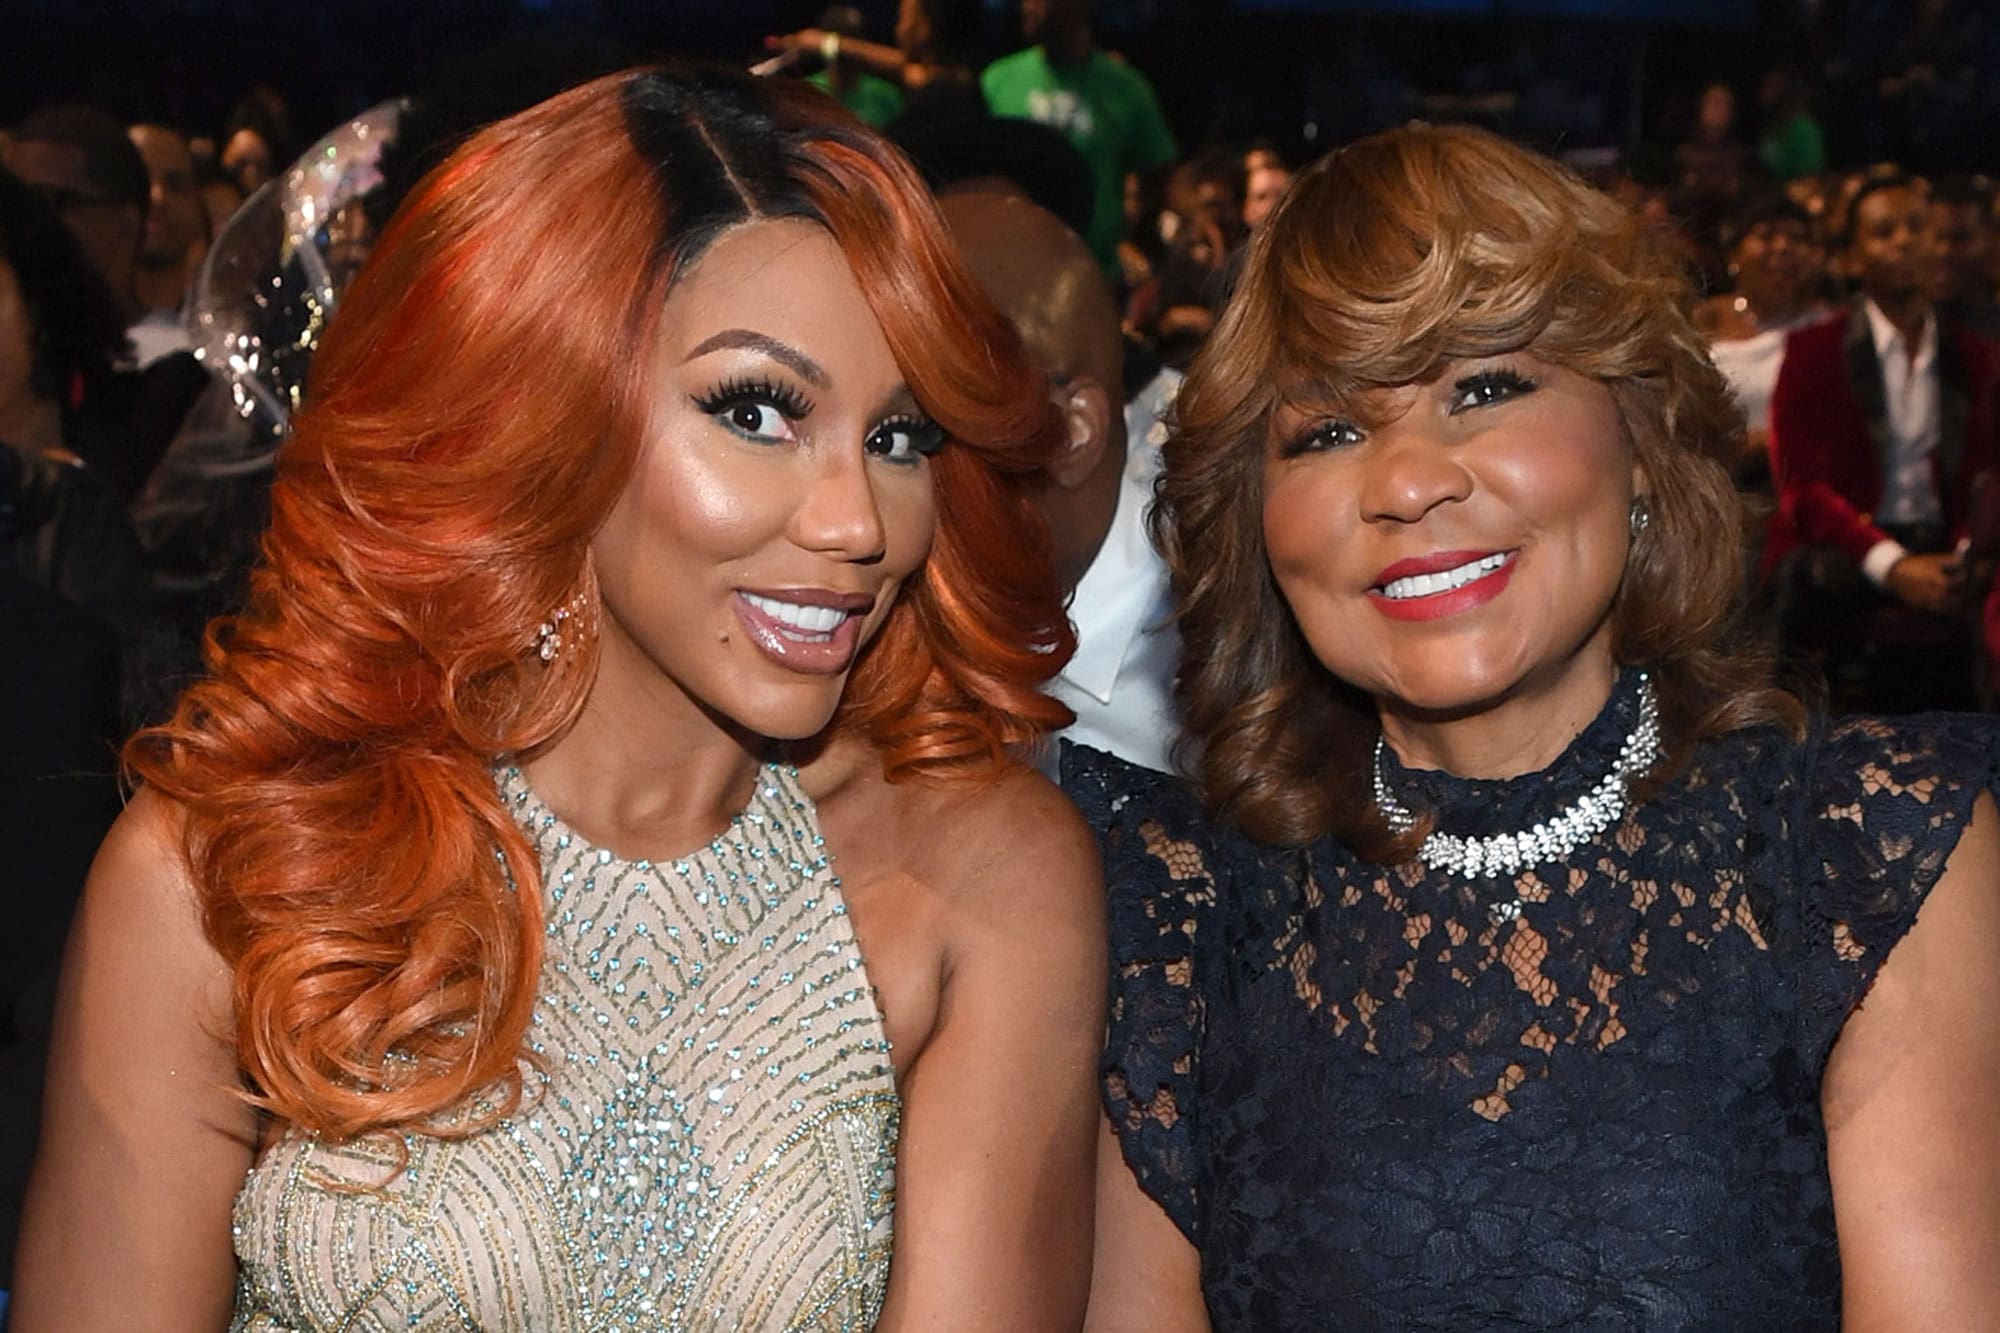 tamar-braxton-is-the-proudest-mom-after-her-son-took-her-mom-out-to-dinner-for-her-birthday